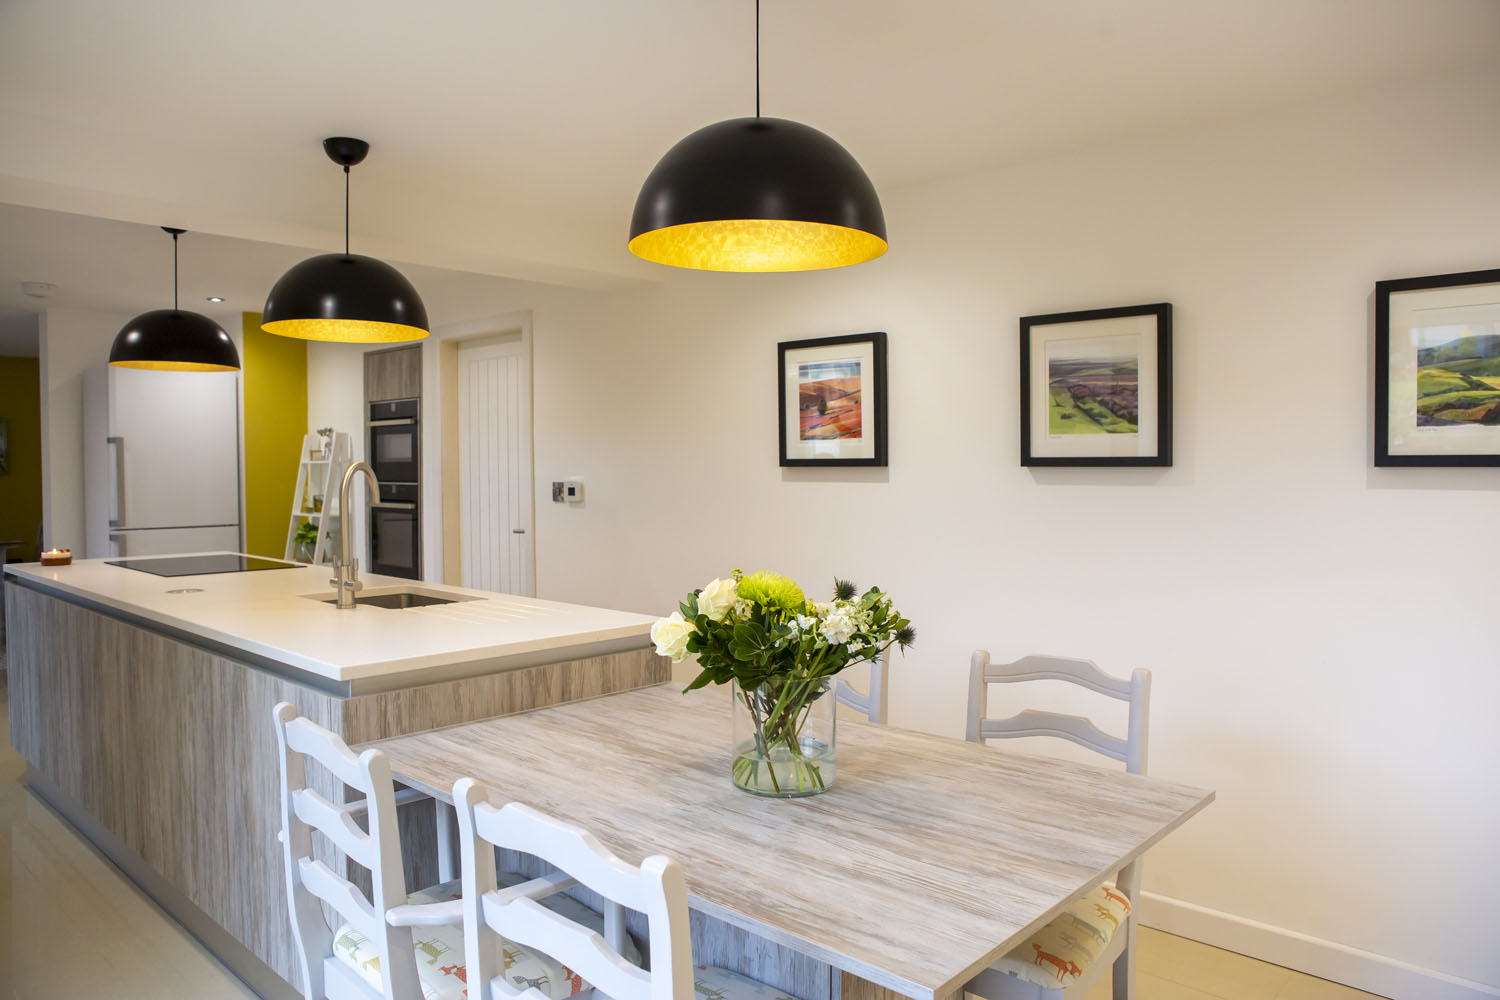 Crown handleless kitchen with dining table extension on kitchen island